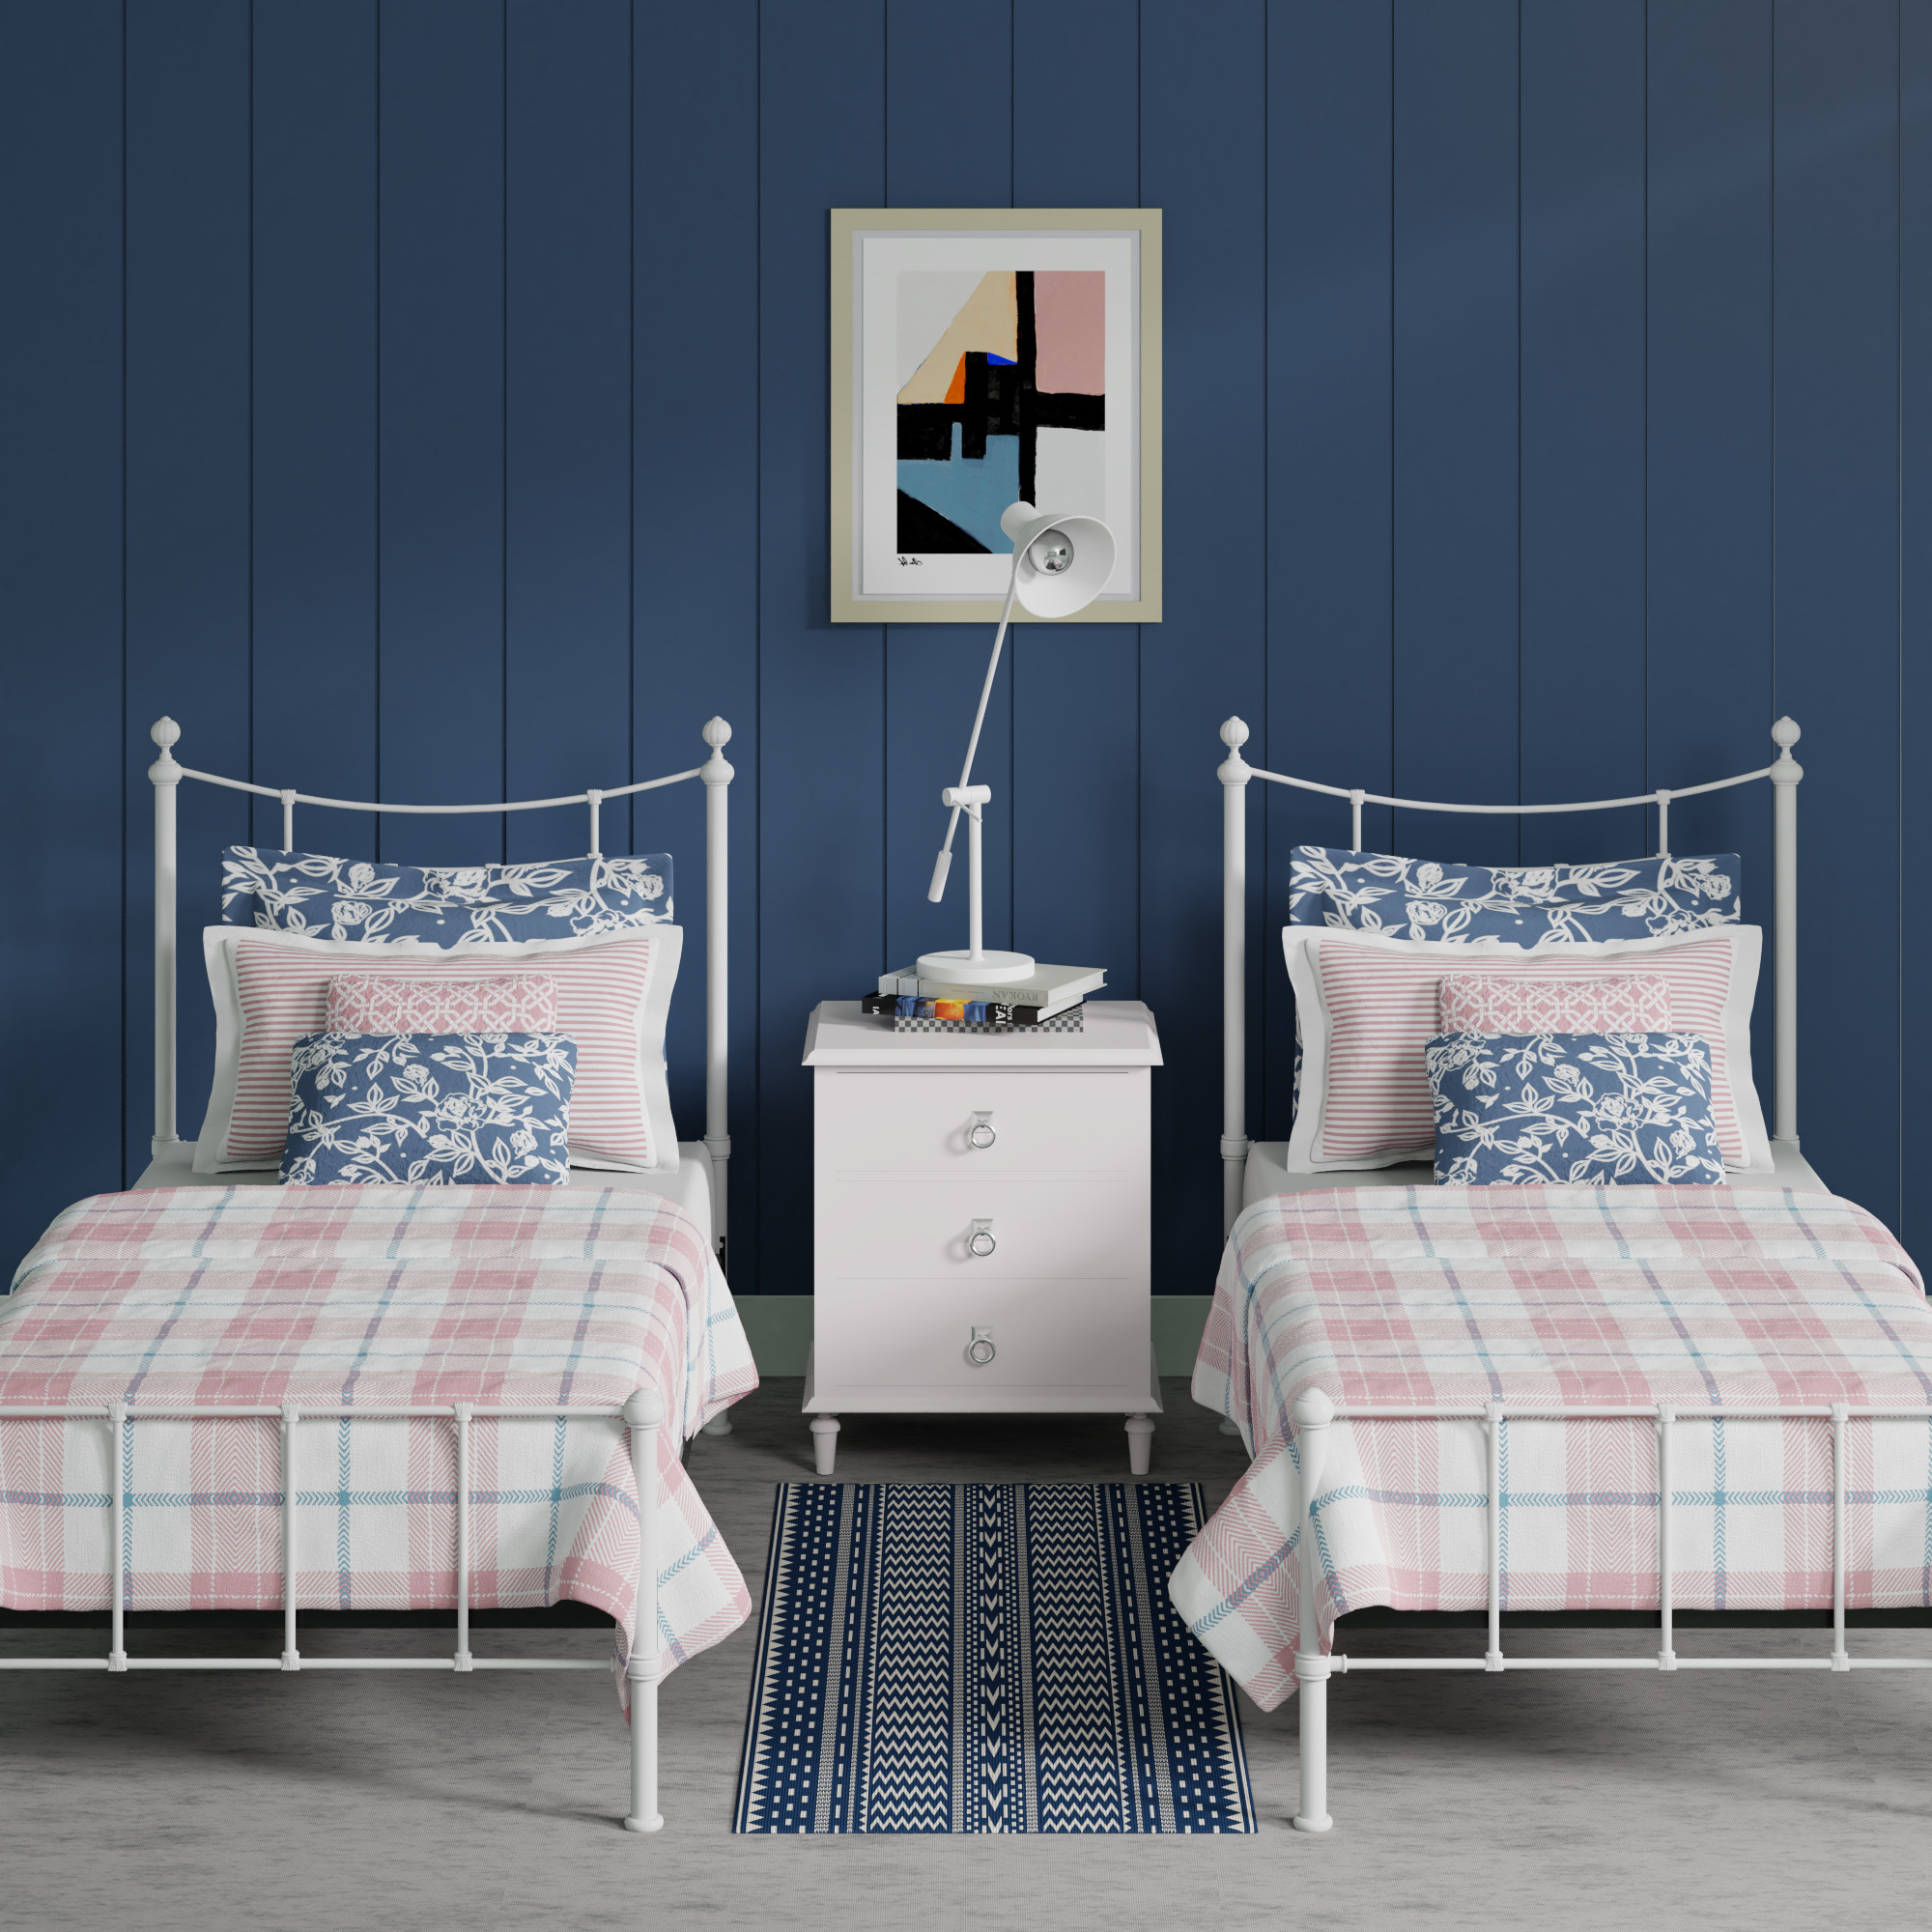 Isabelle single iron bed - Image blue pink